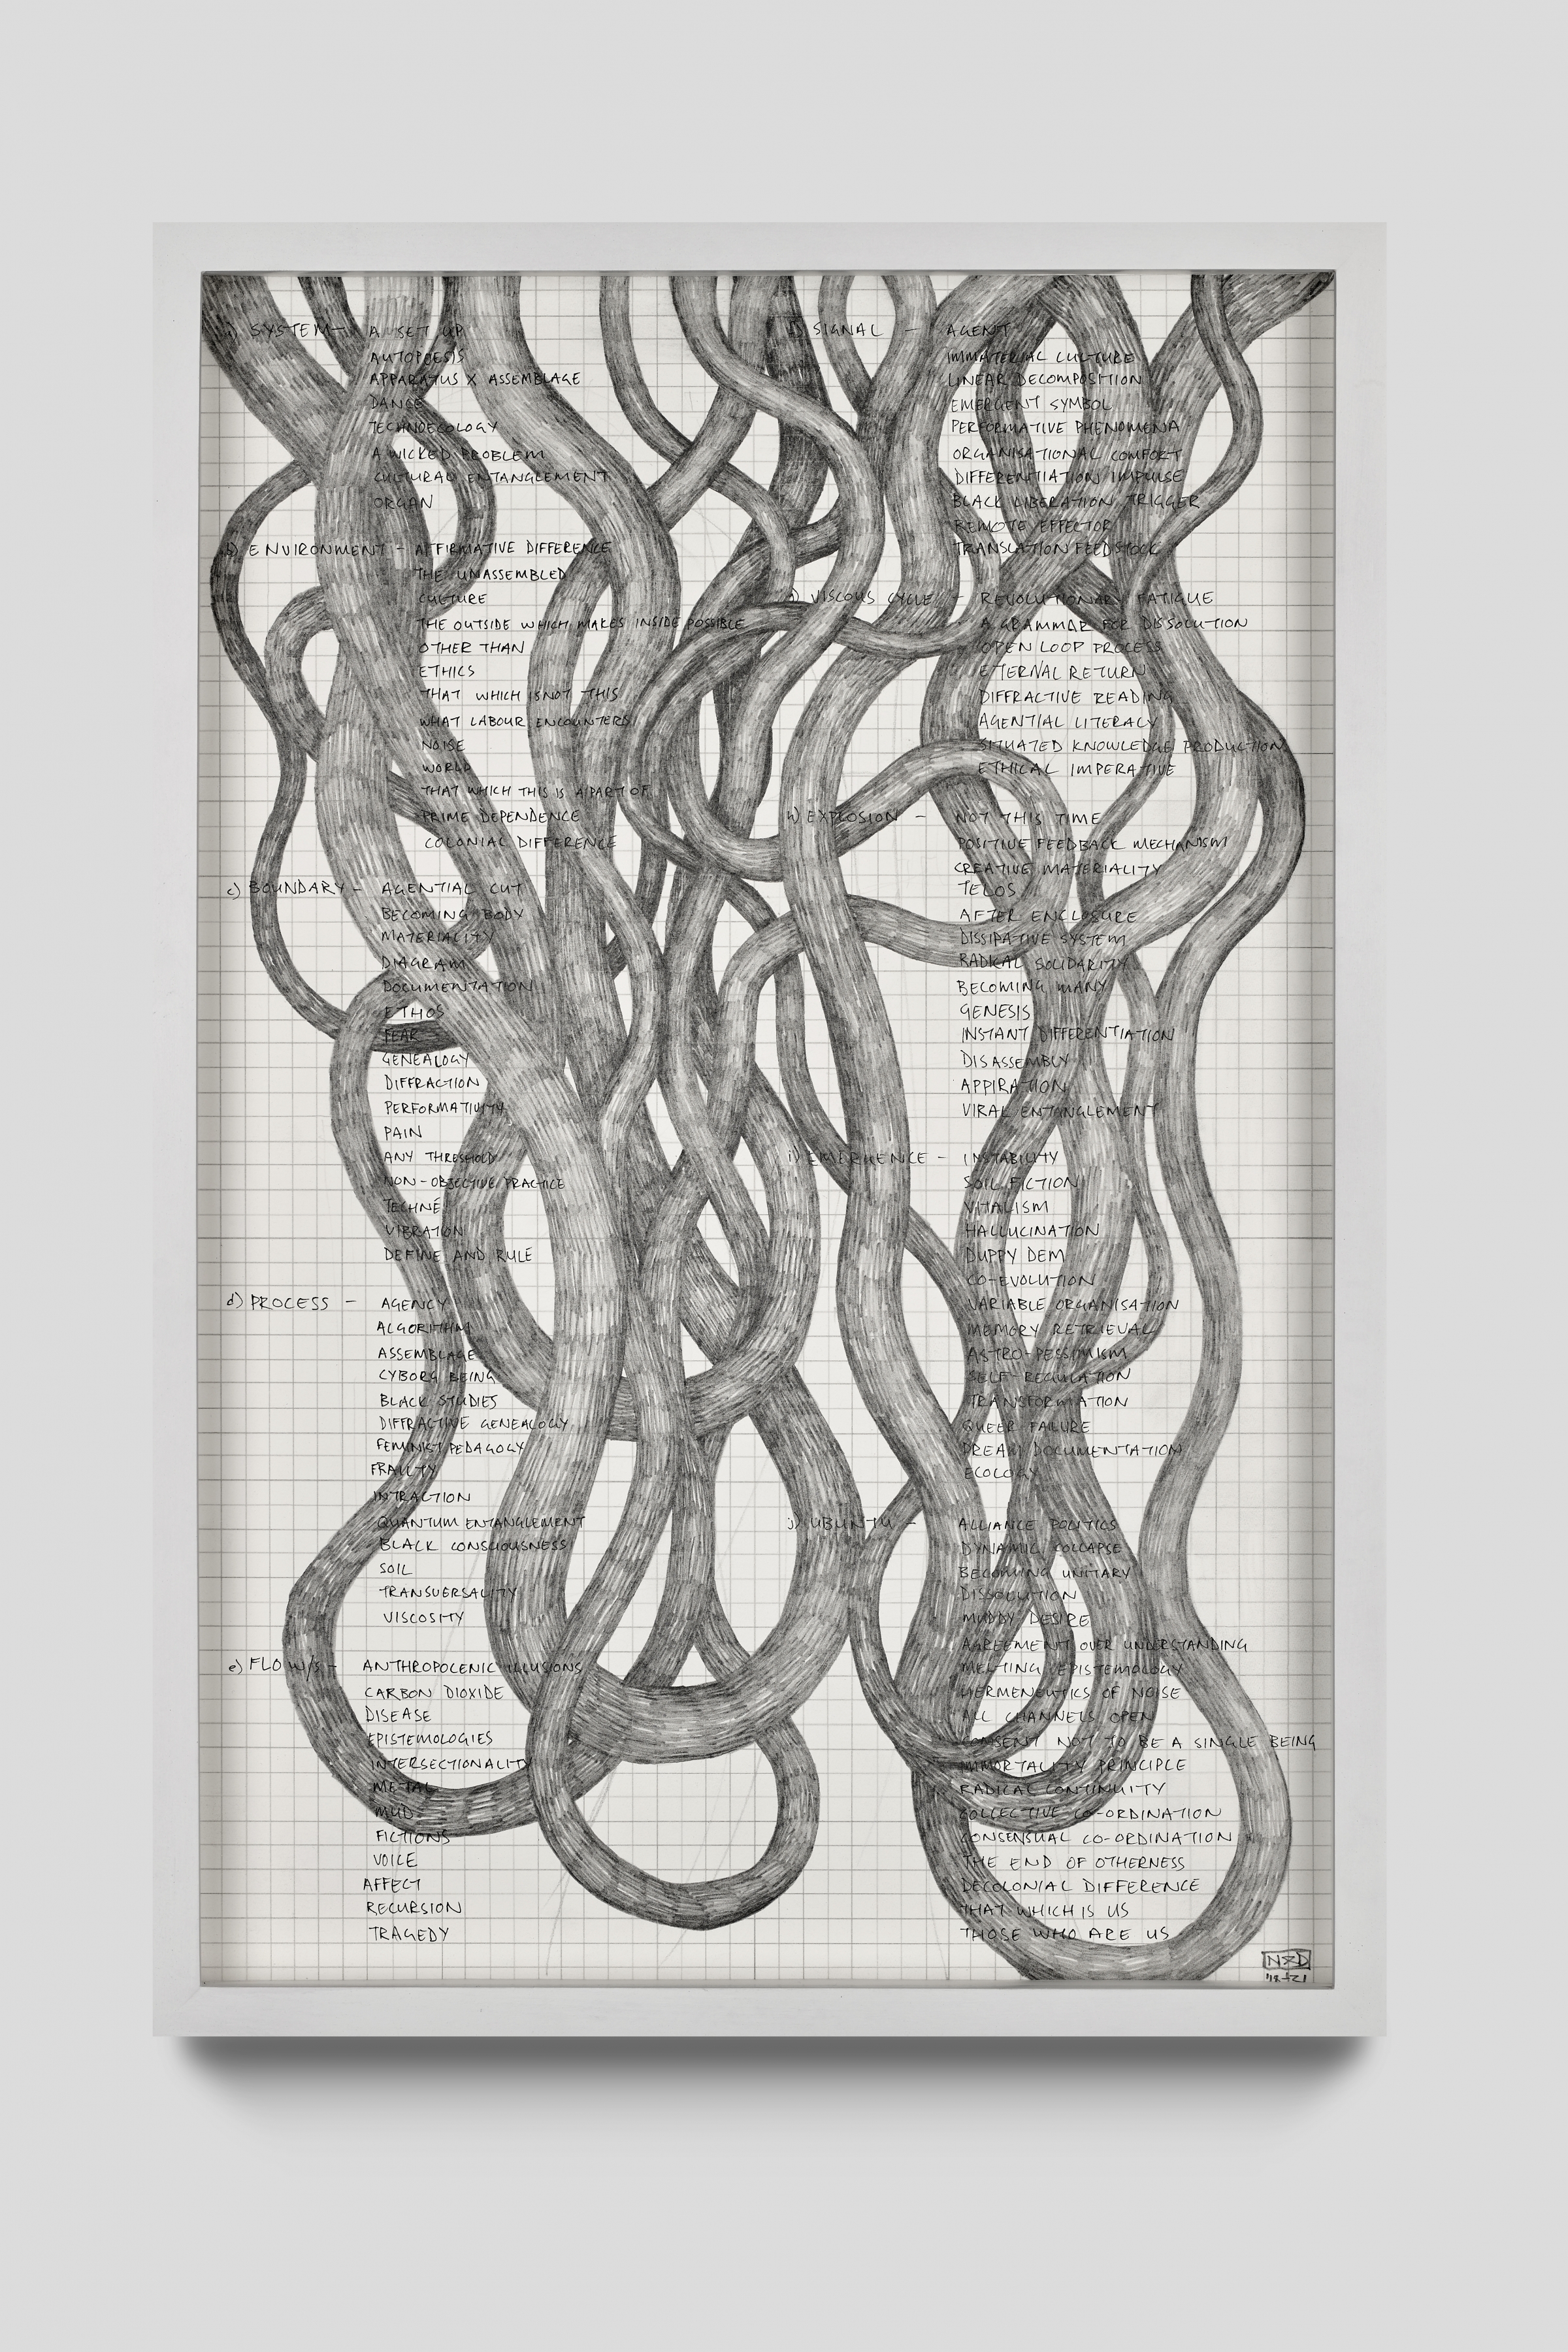 a systems vocabulary

2021

pencil on paper

45.7 x 30.5 cm

sales enquiries